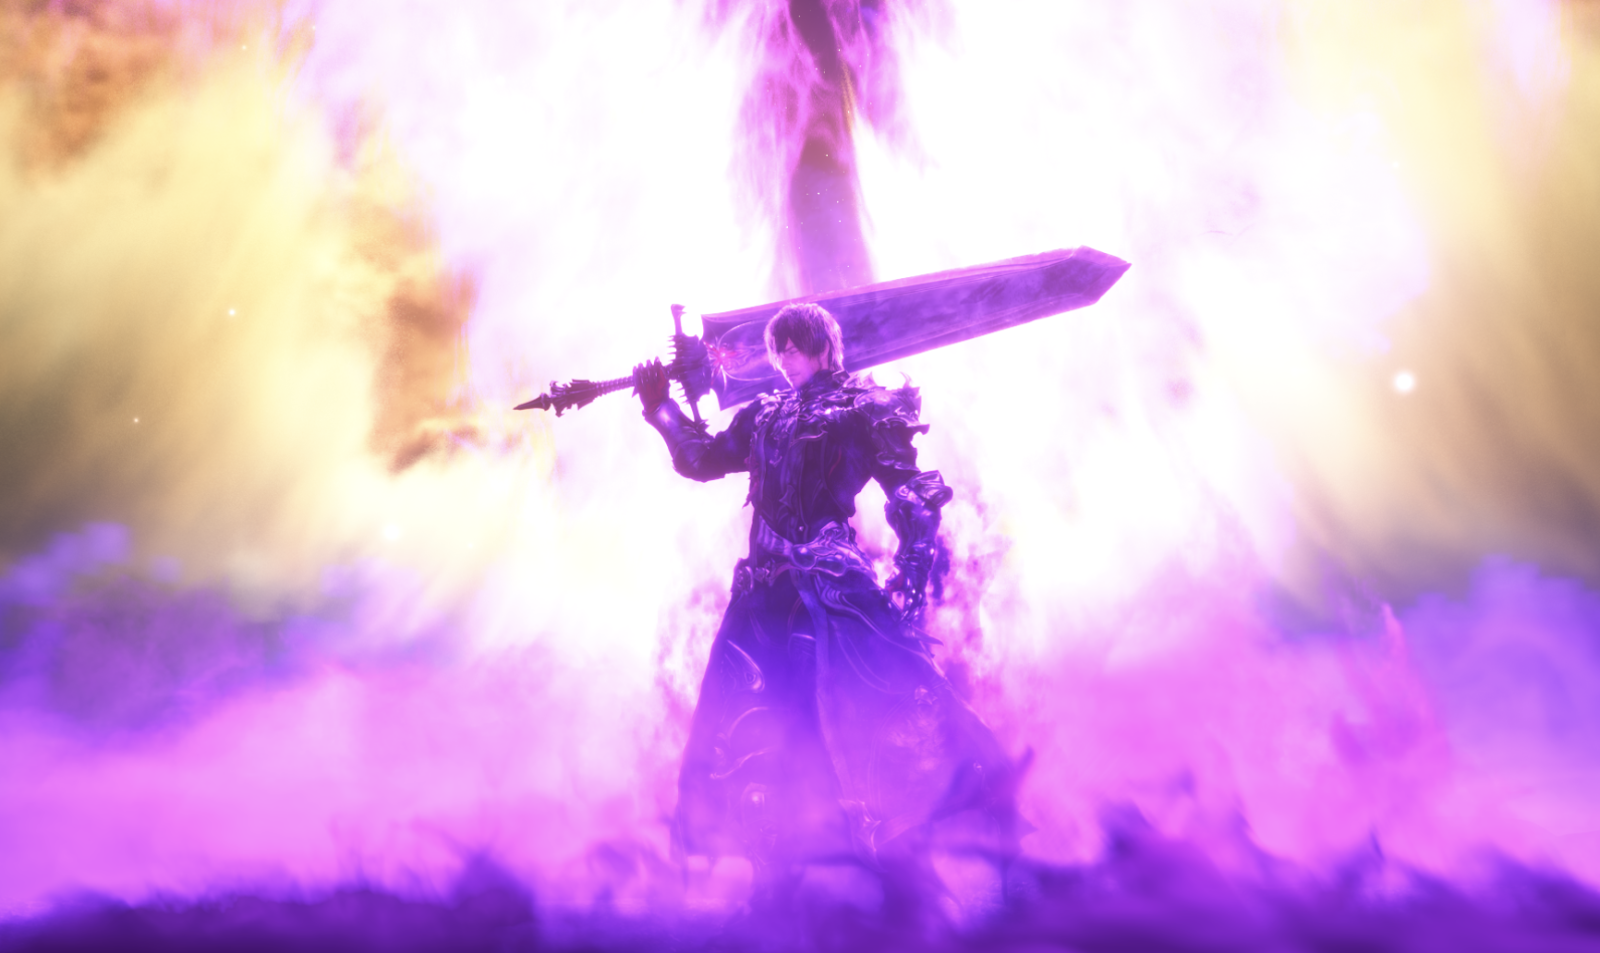 Final Fantasy XIV Director Talks Class Changes, Music And Role-Playing